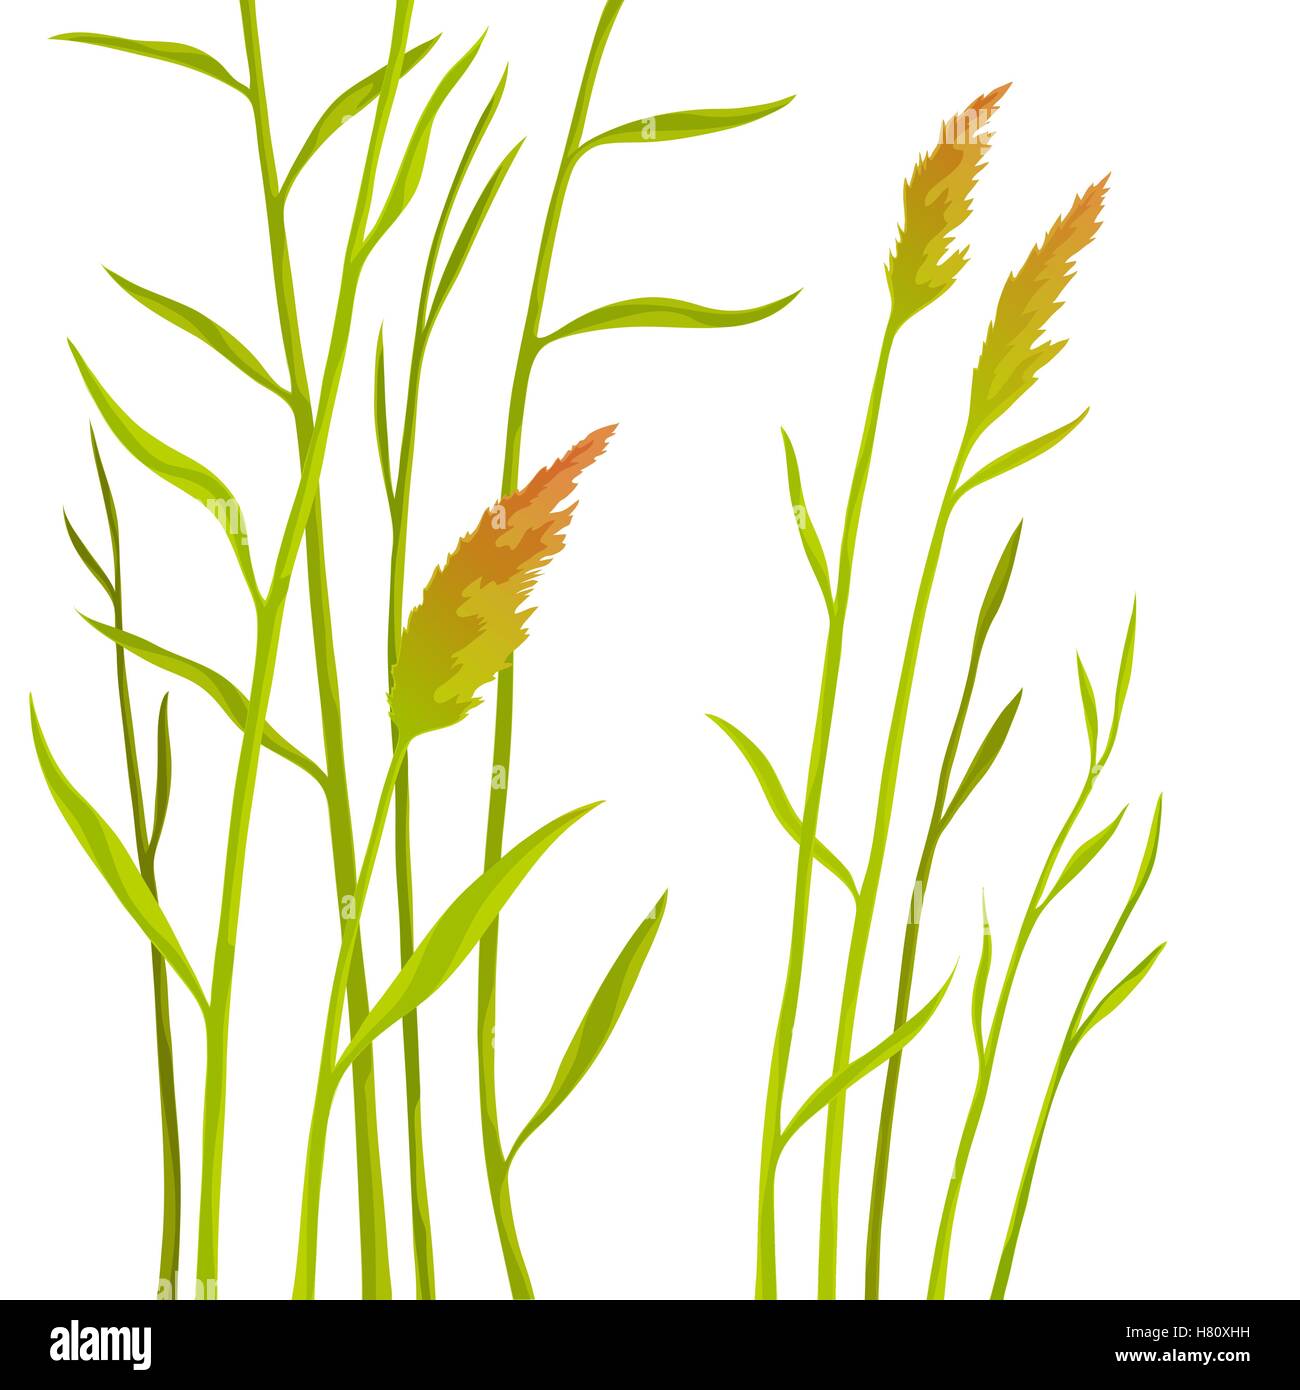 Reed land Stock Vector Images - Alamy